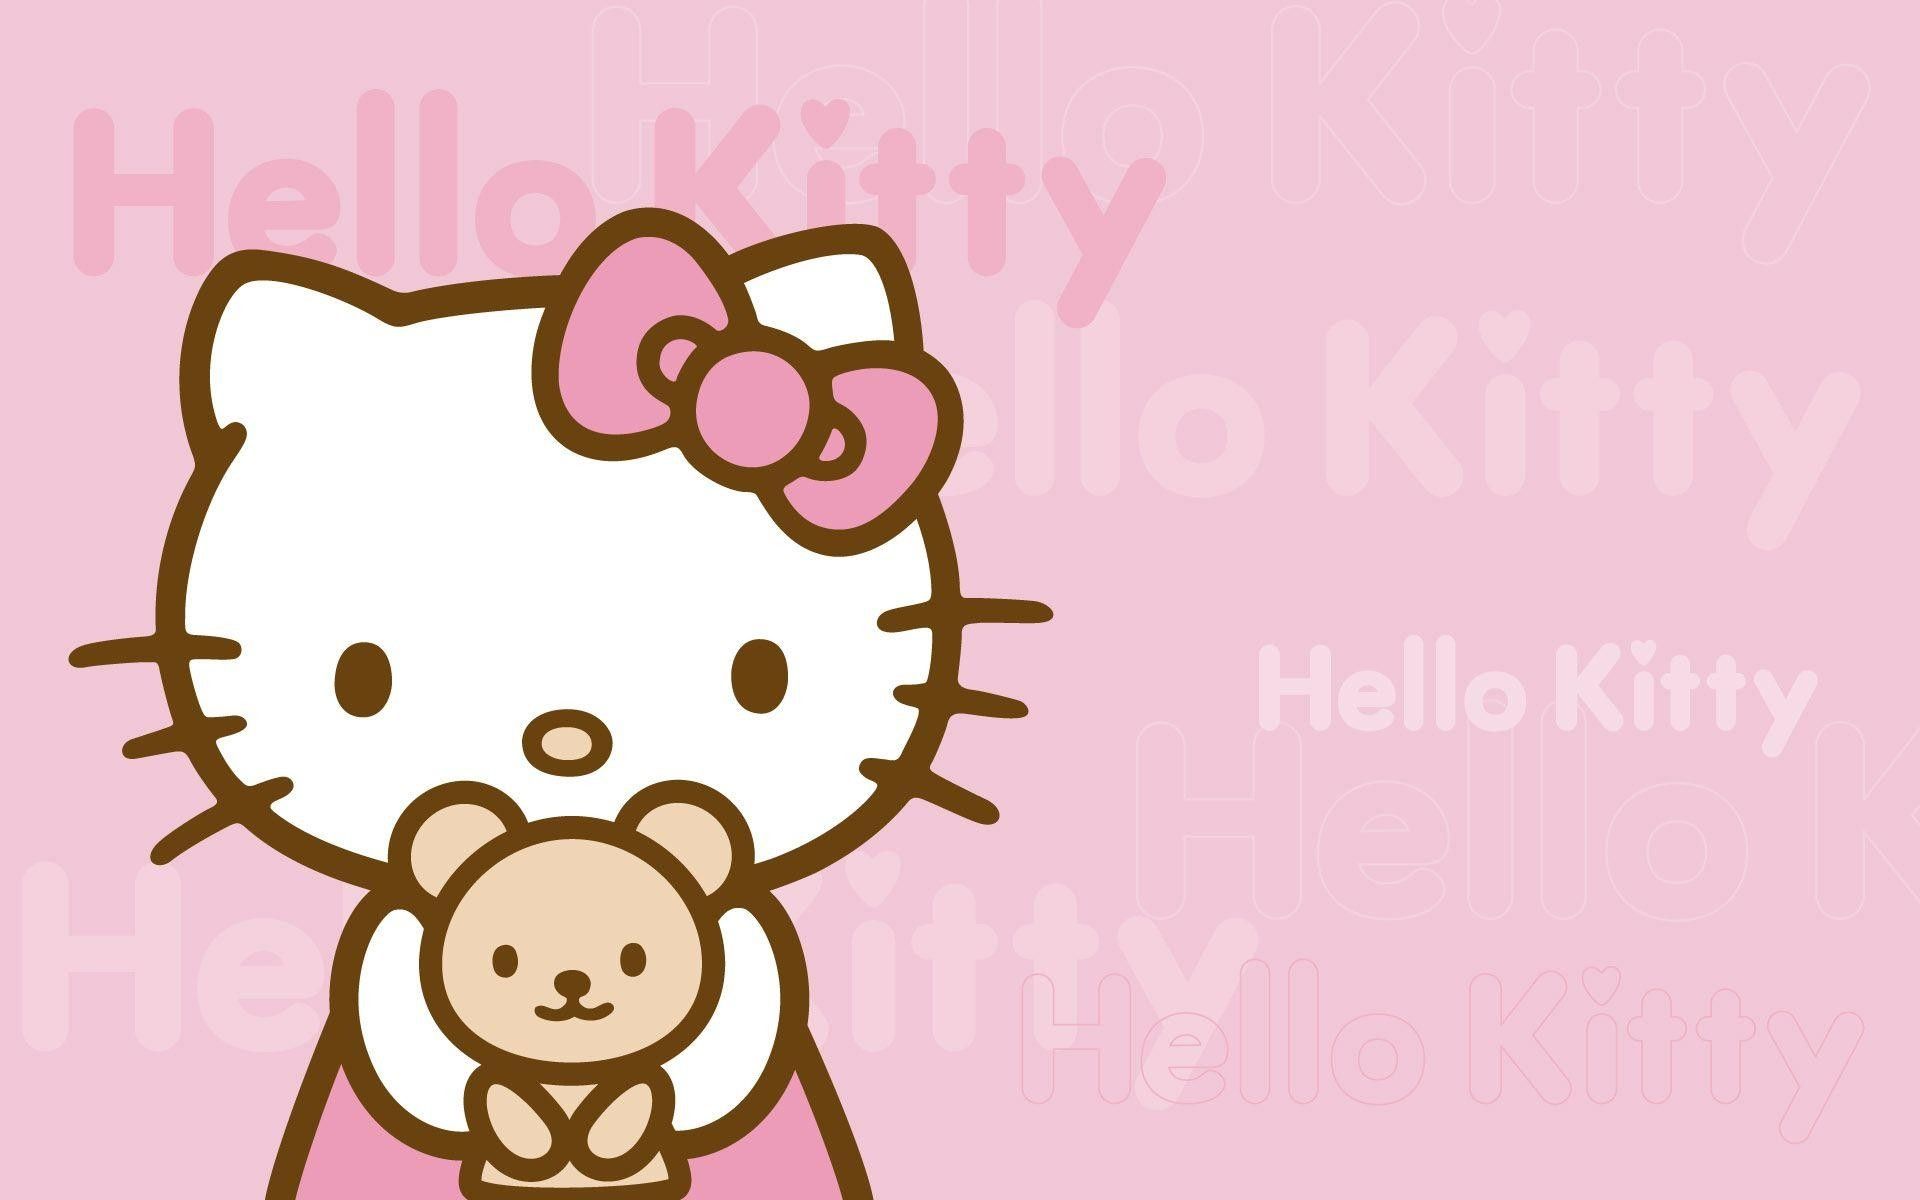 Hello Kitty  Black Background Wallpaper Download  MobCup